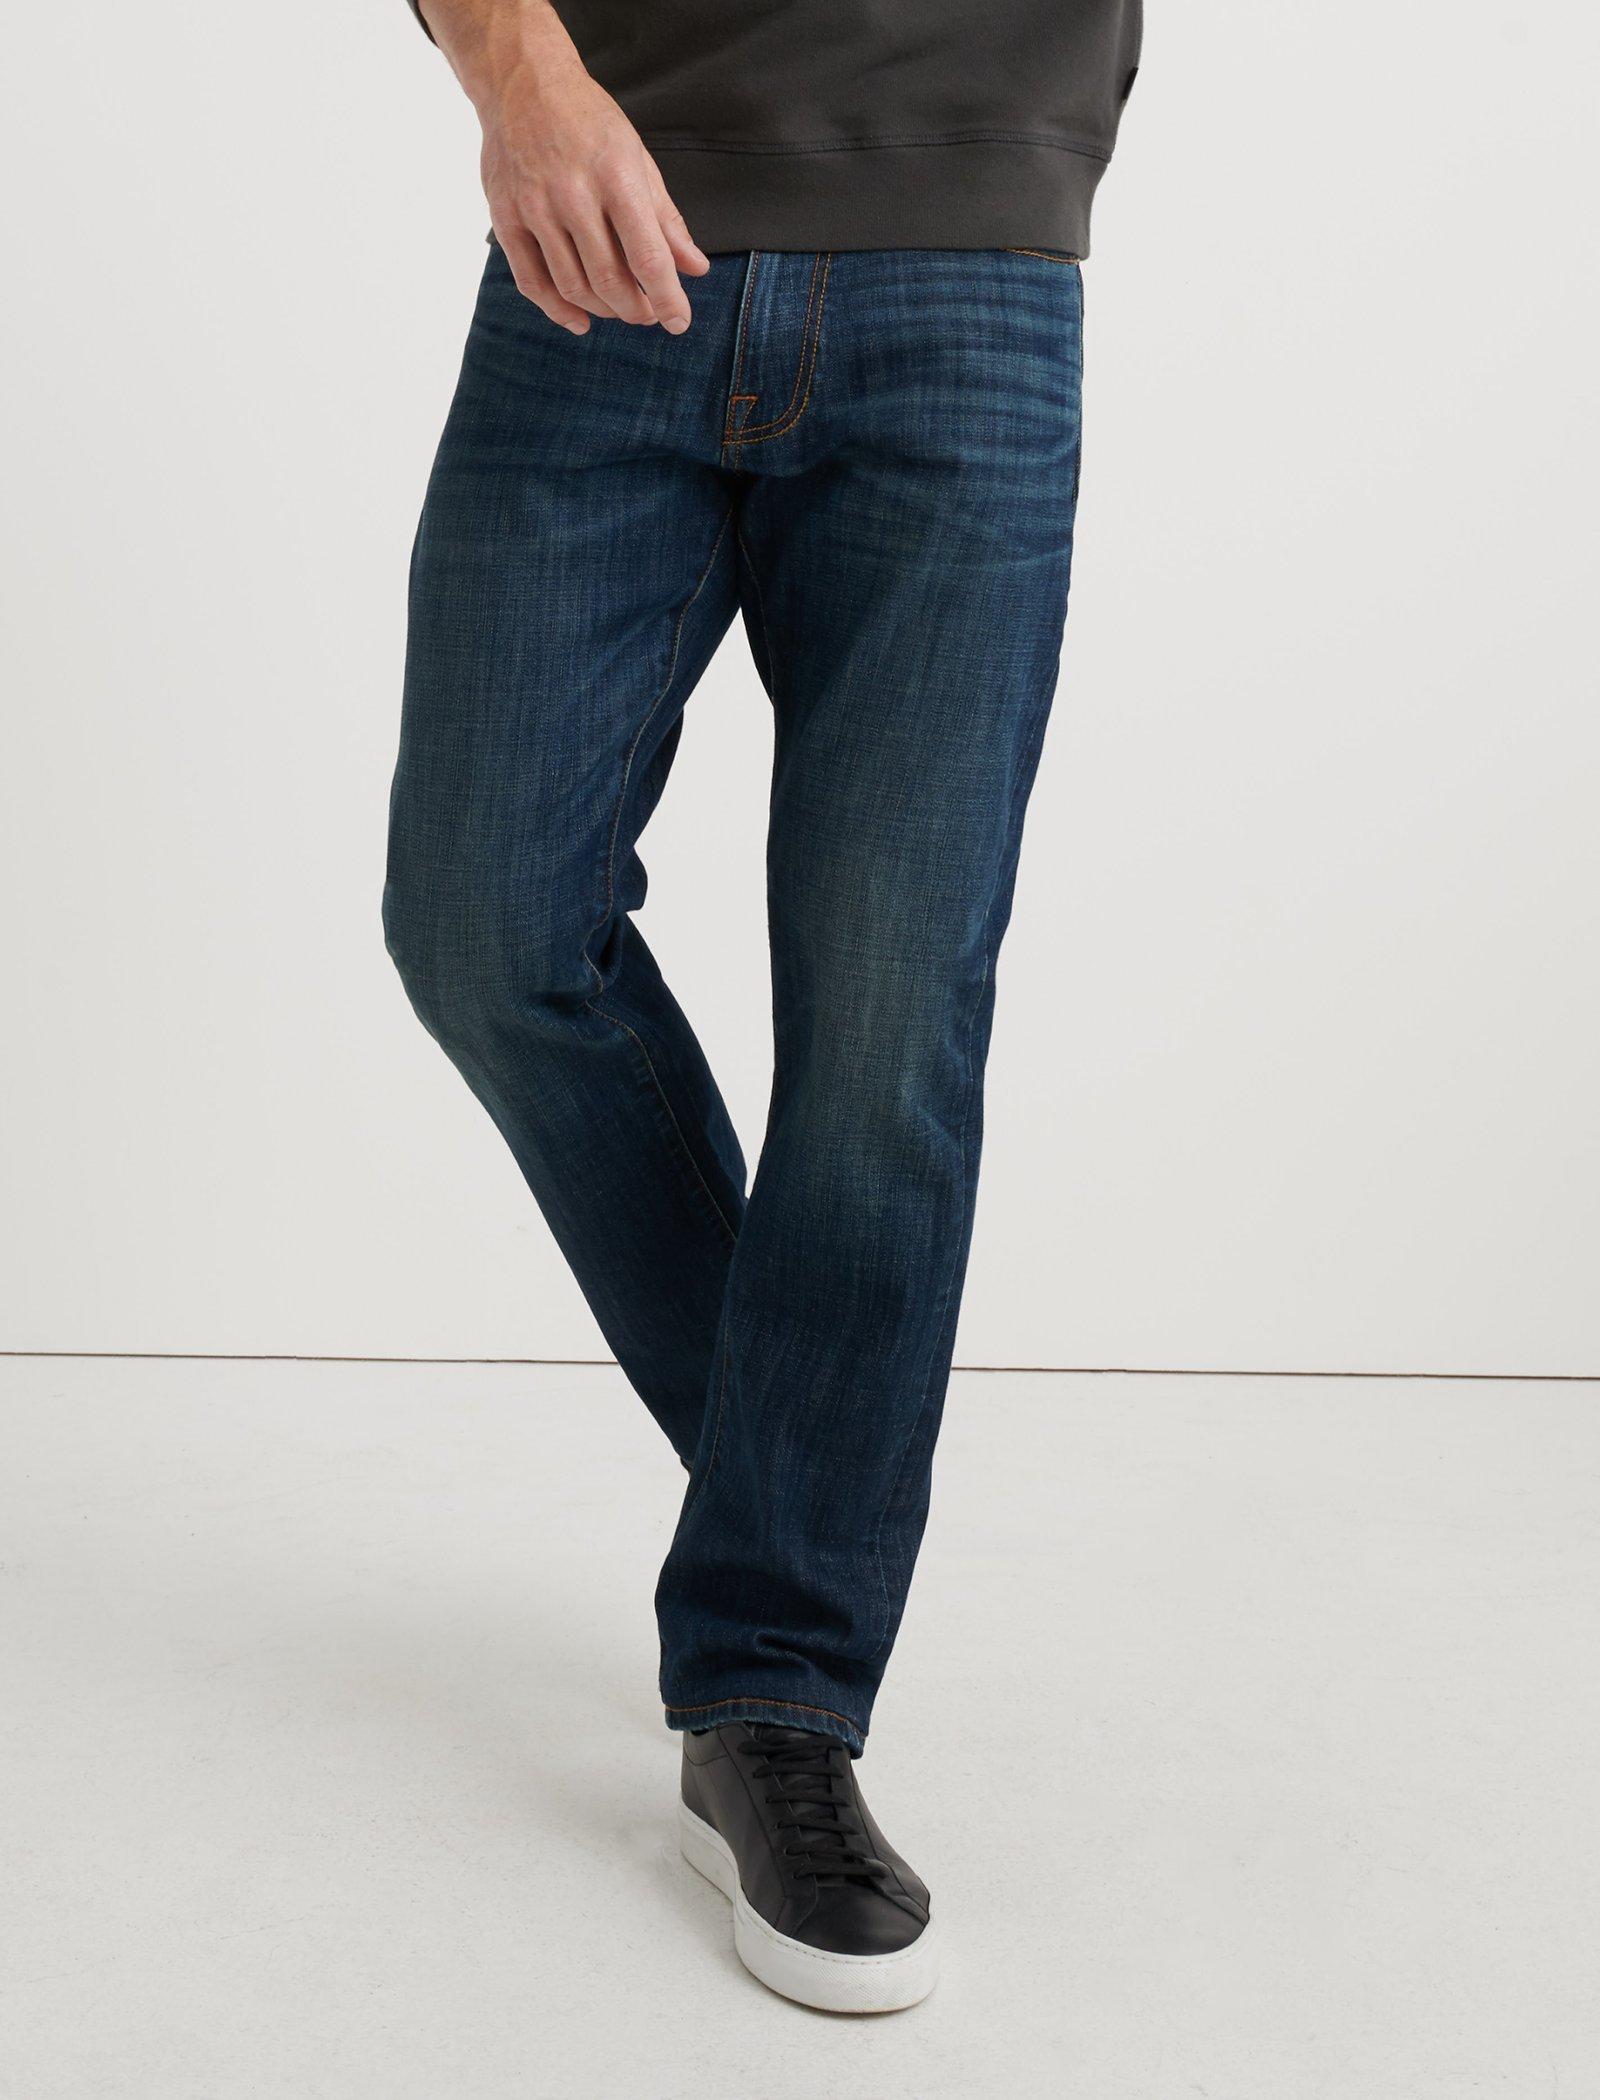 410 Athletic Fit Jean | Lucky Brand